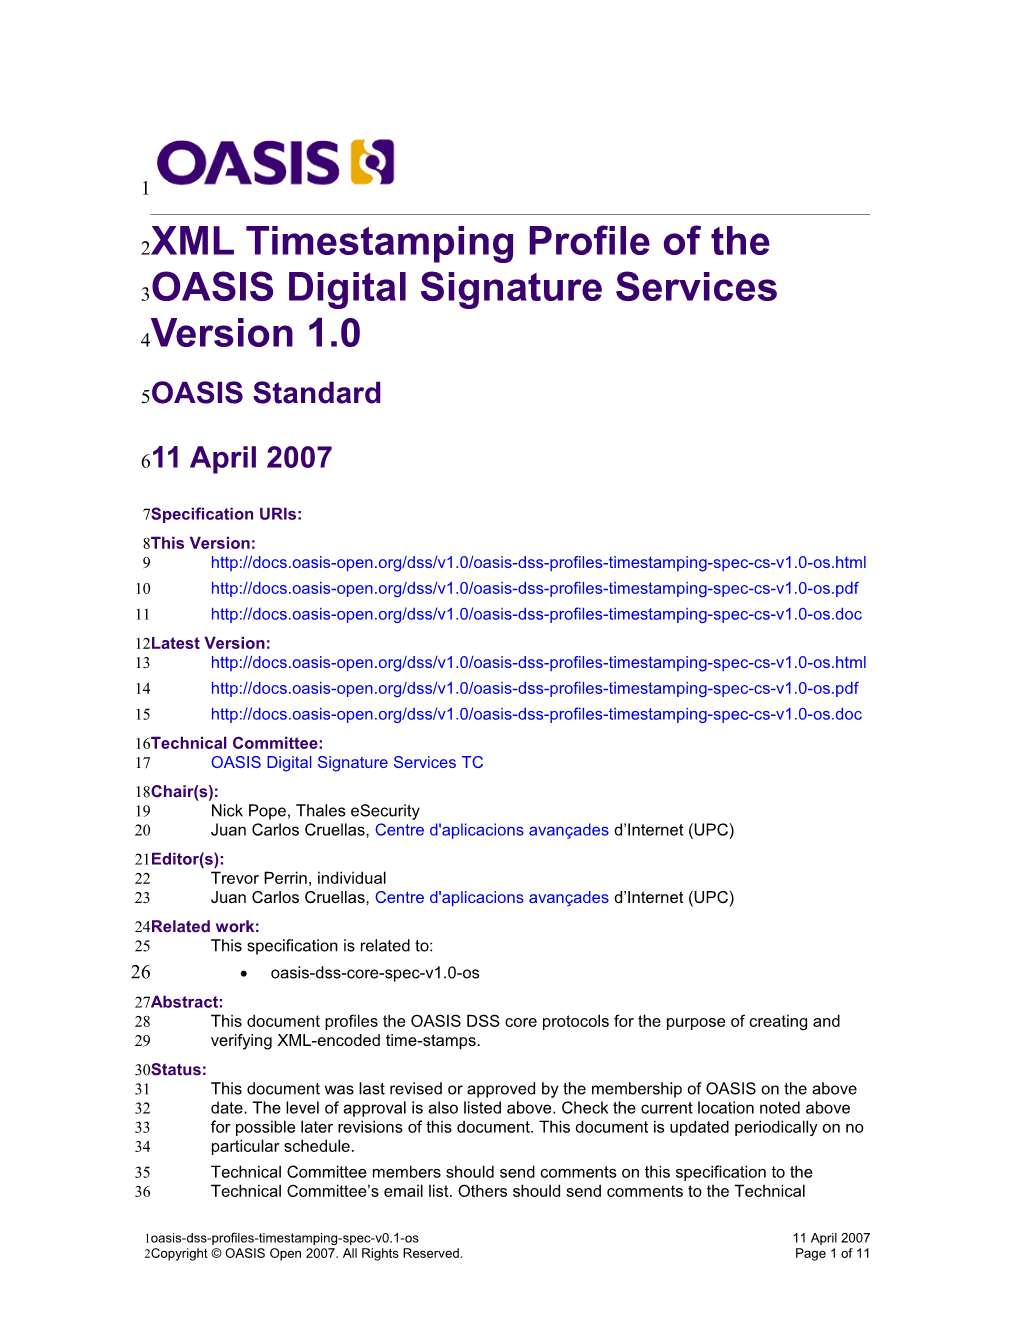 XML Timestamping Profile of the OASIS Digital Signature Services Version 1.0